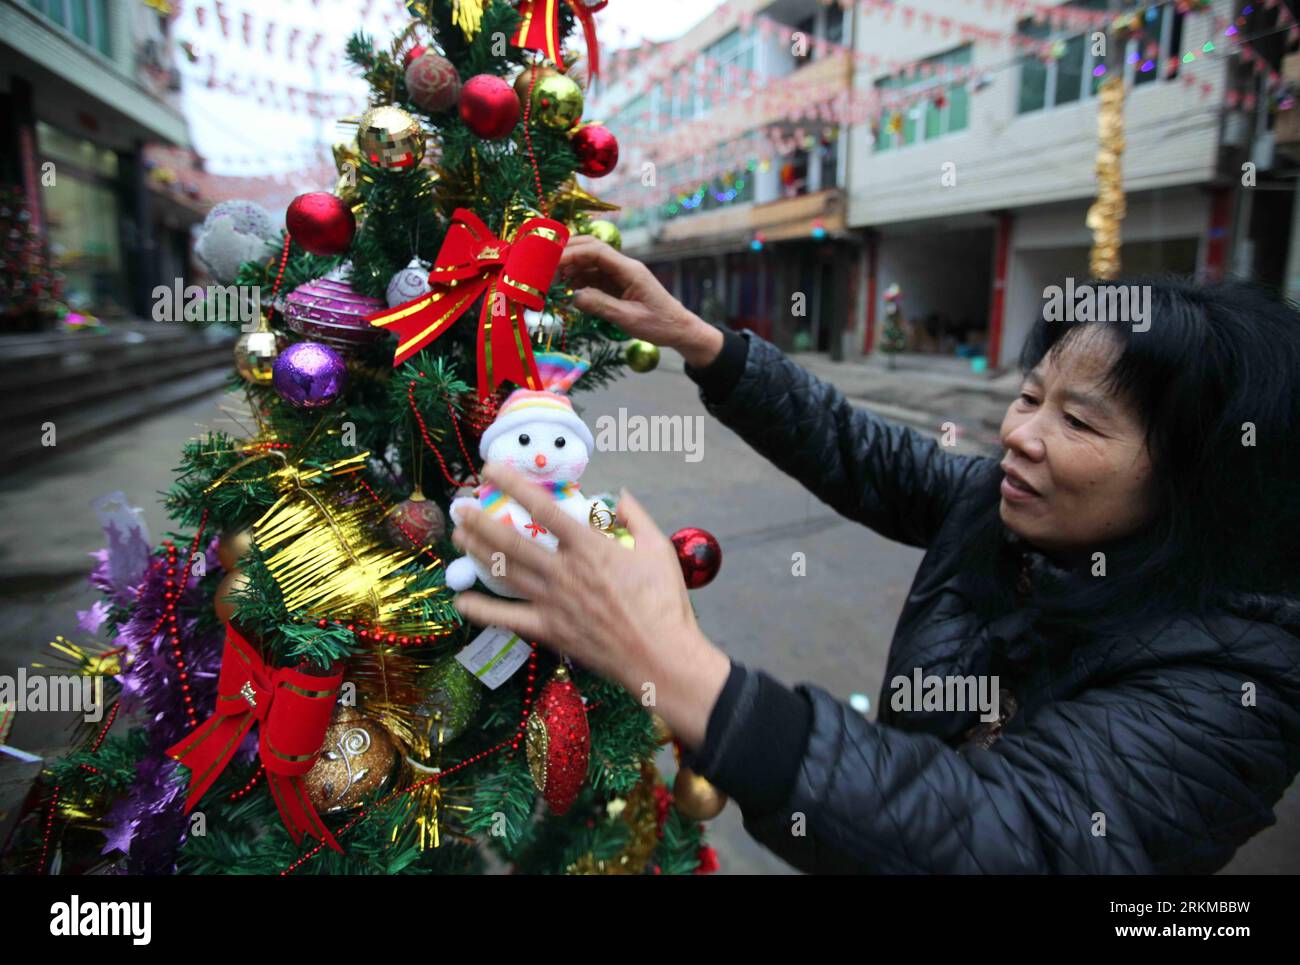 Bildnummer: 56661989  Datum: 06.12.2011  Copyright: imago/Xinhua (111207) -- RUIAN, Dec. 7, 2011 (Xinhua) -- A villager decorates a Christmas tree with ornaments to greet the coming Christmas in Xitan Village of Huling Town in Ruian City, east China s Zhejiang Province, Dec. 6, 2011. Xitan Village, also called the Christmas Village , is famous for its production of Christmas crafts. There are over 240 processing factories and enterprises in the village. The total export sales this year have reached 400 million yuan (about 62 million U.S. dollars) while the domestic sales have added up to 100 m Stock Photo